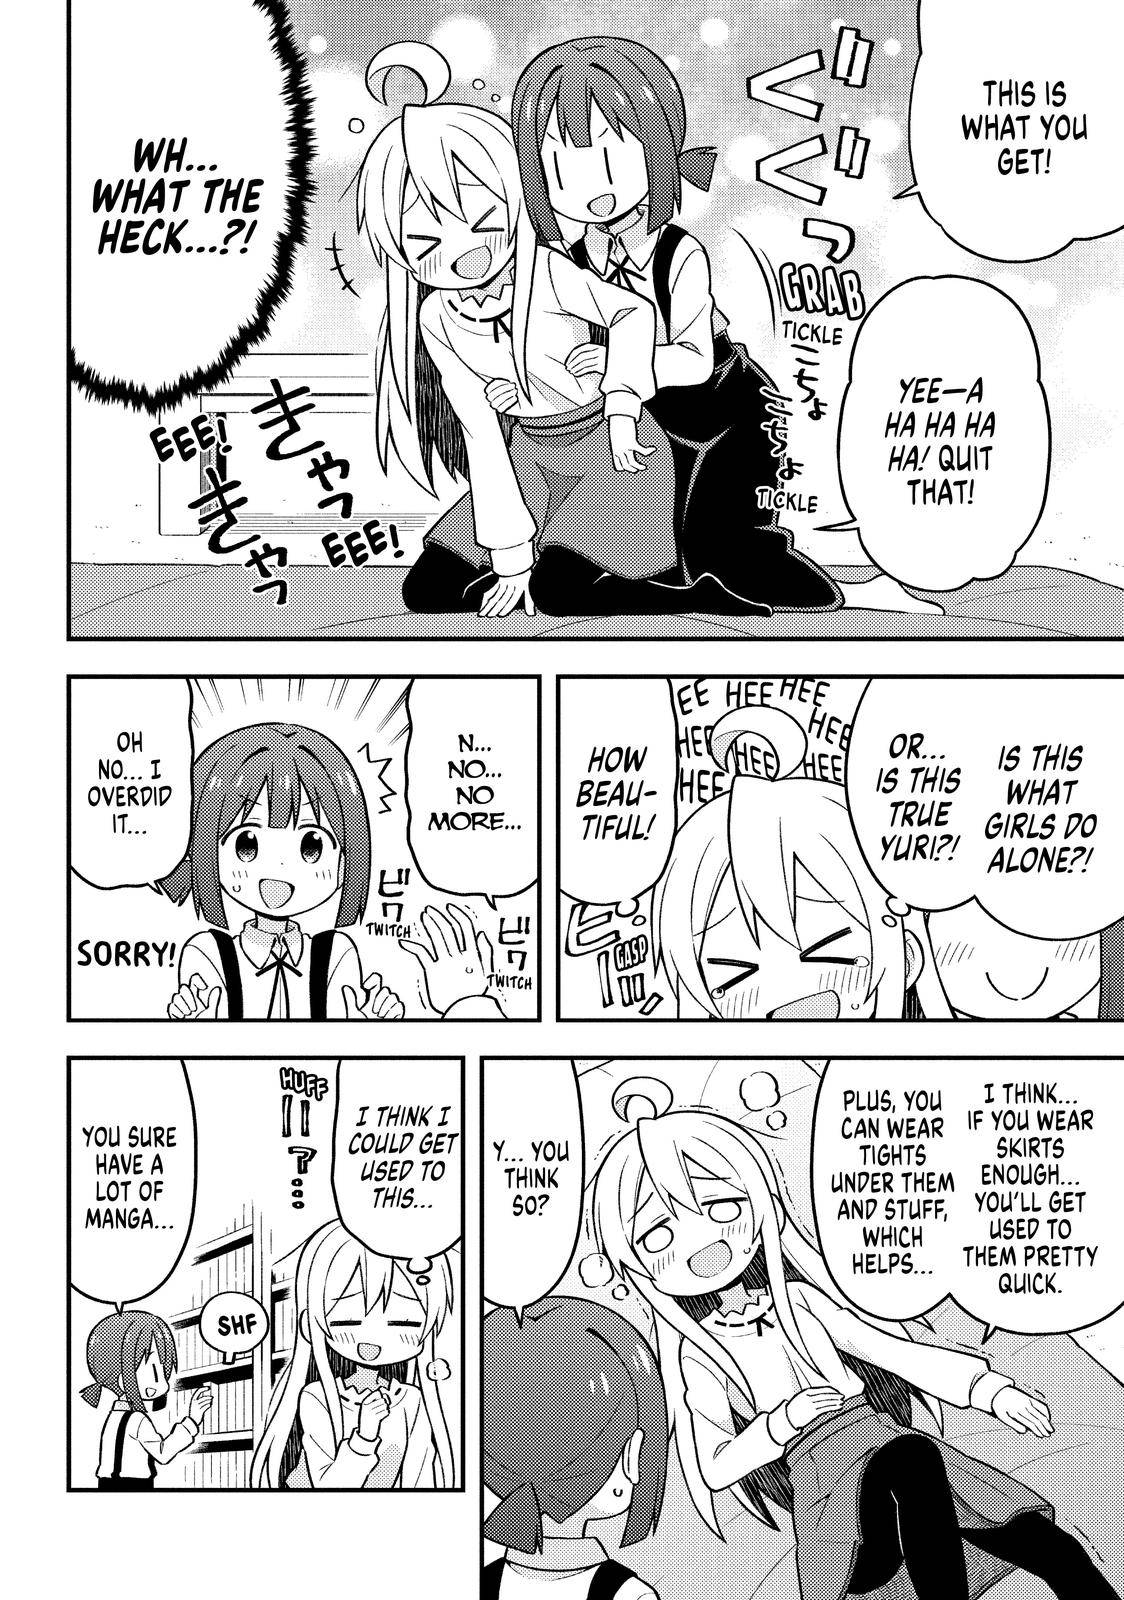 ONIMAI - I'm Now Your Sister! - chapter 13 - #6